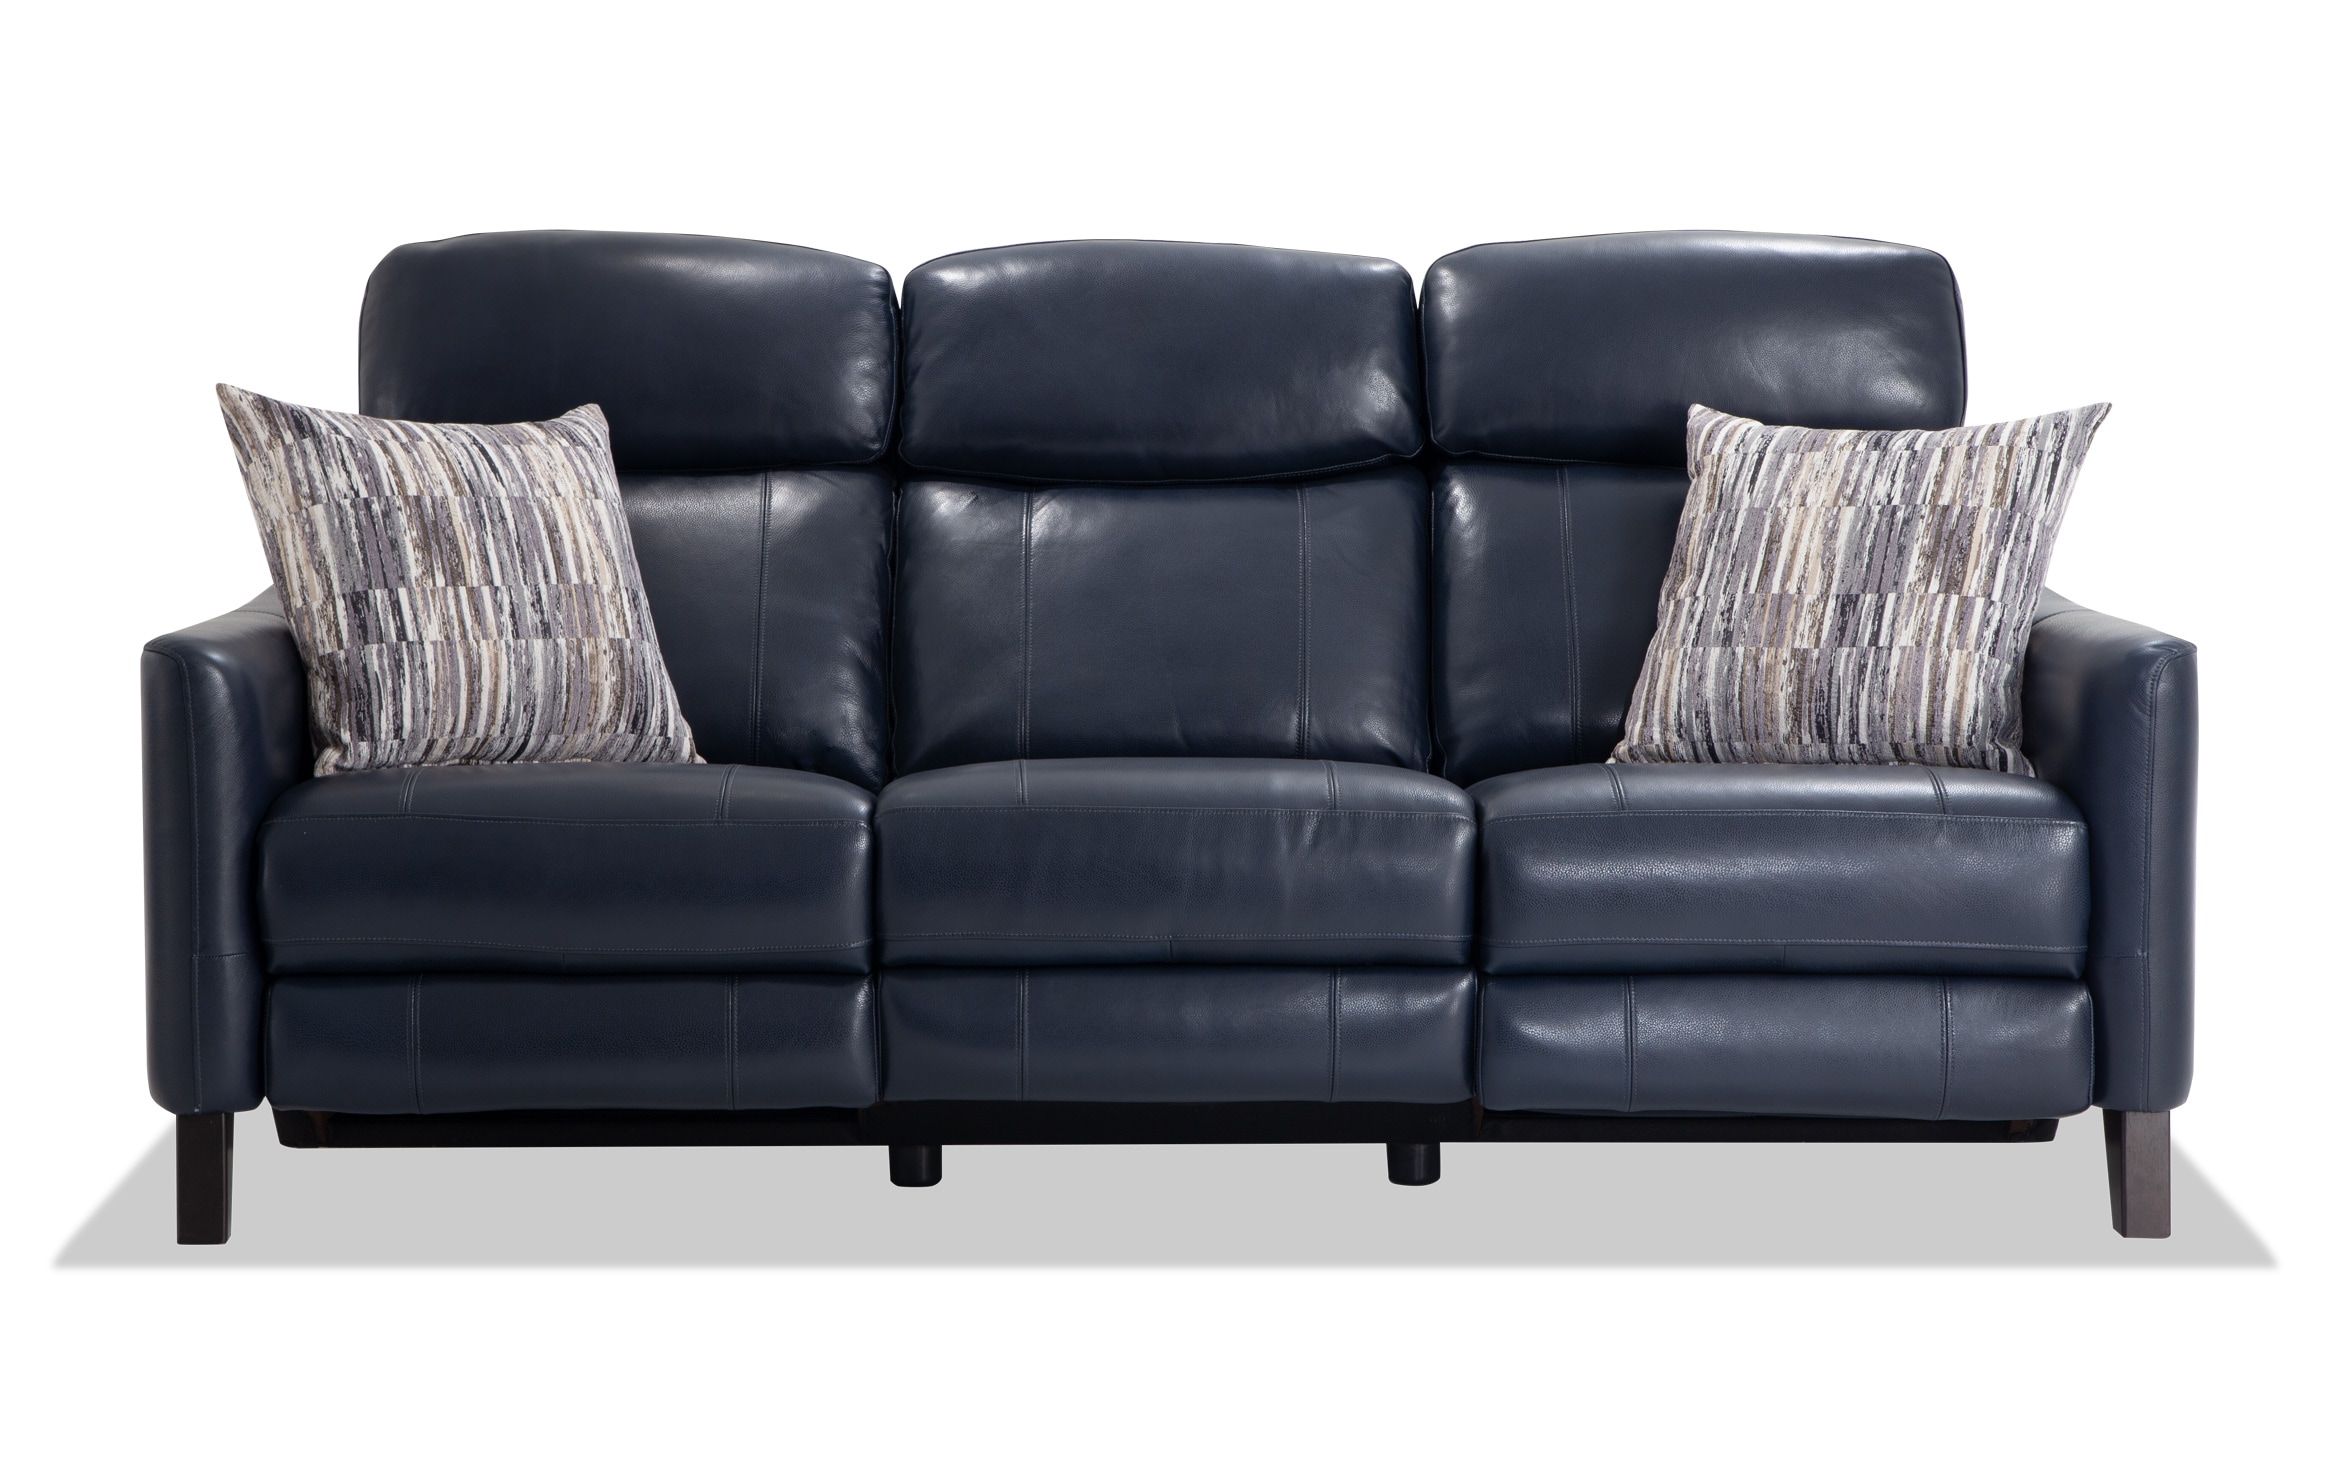 Symmetry Navy Leather Power Reclining, White Leather Sofa Recliners